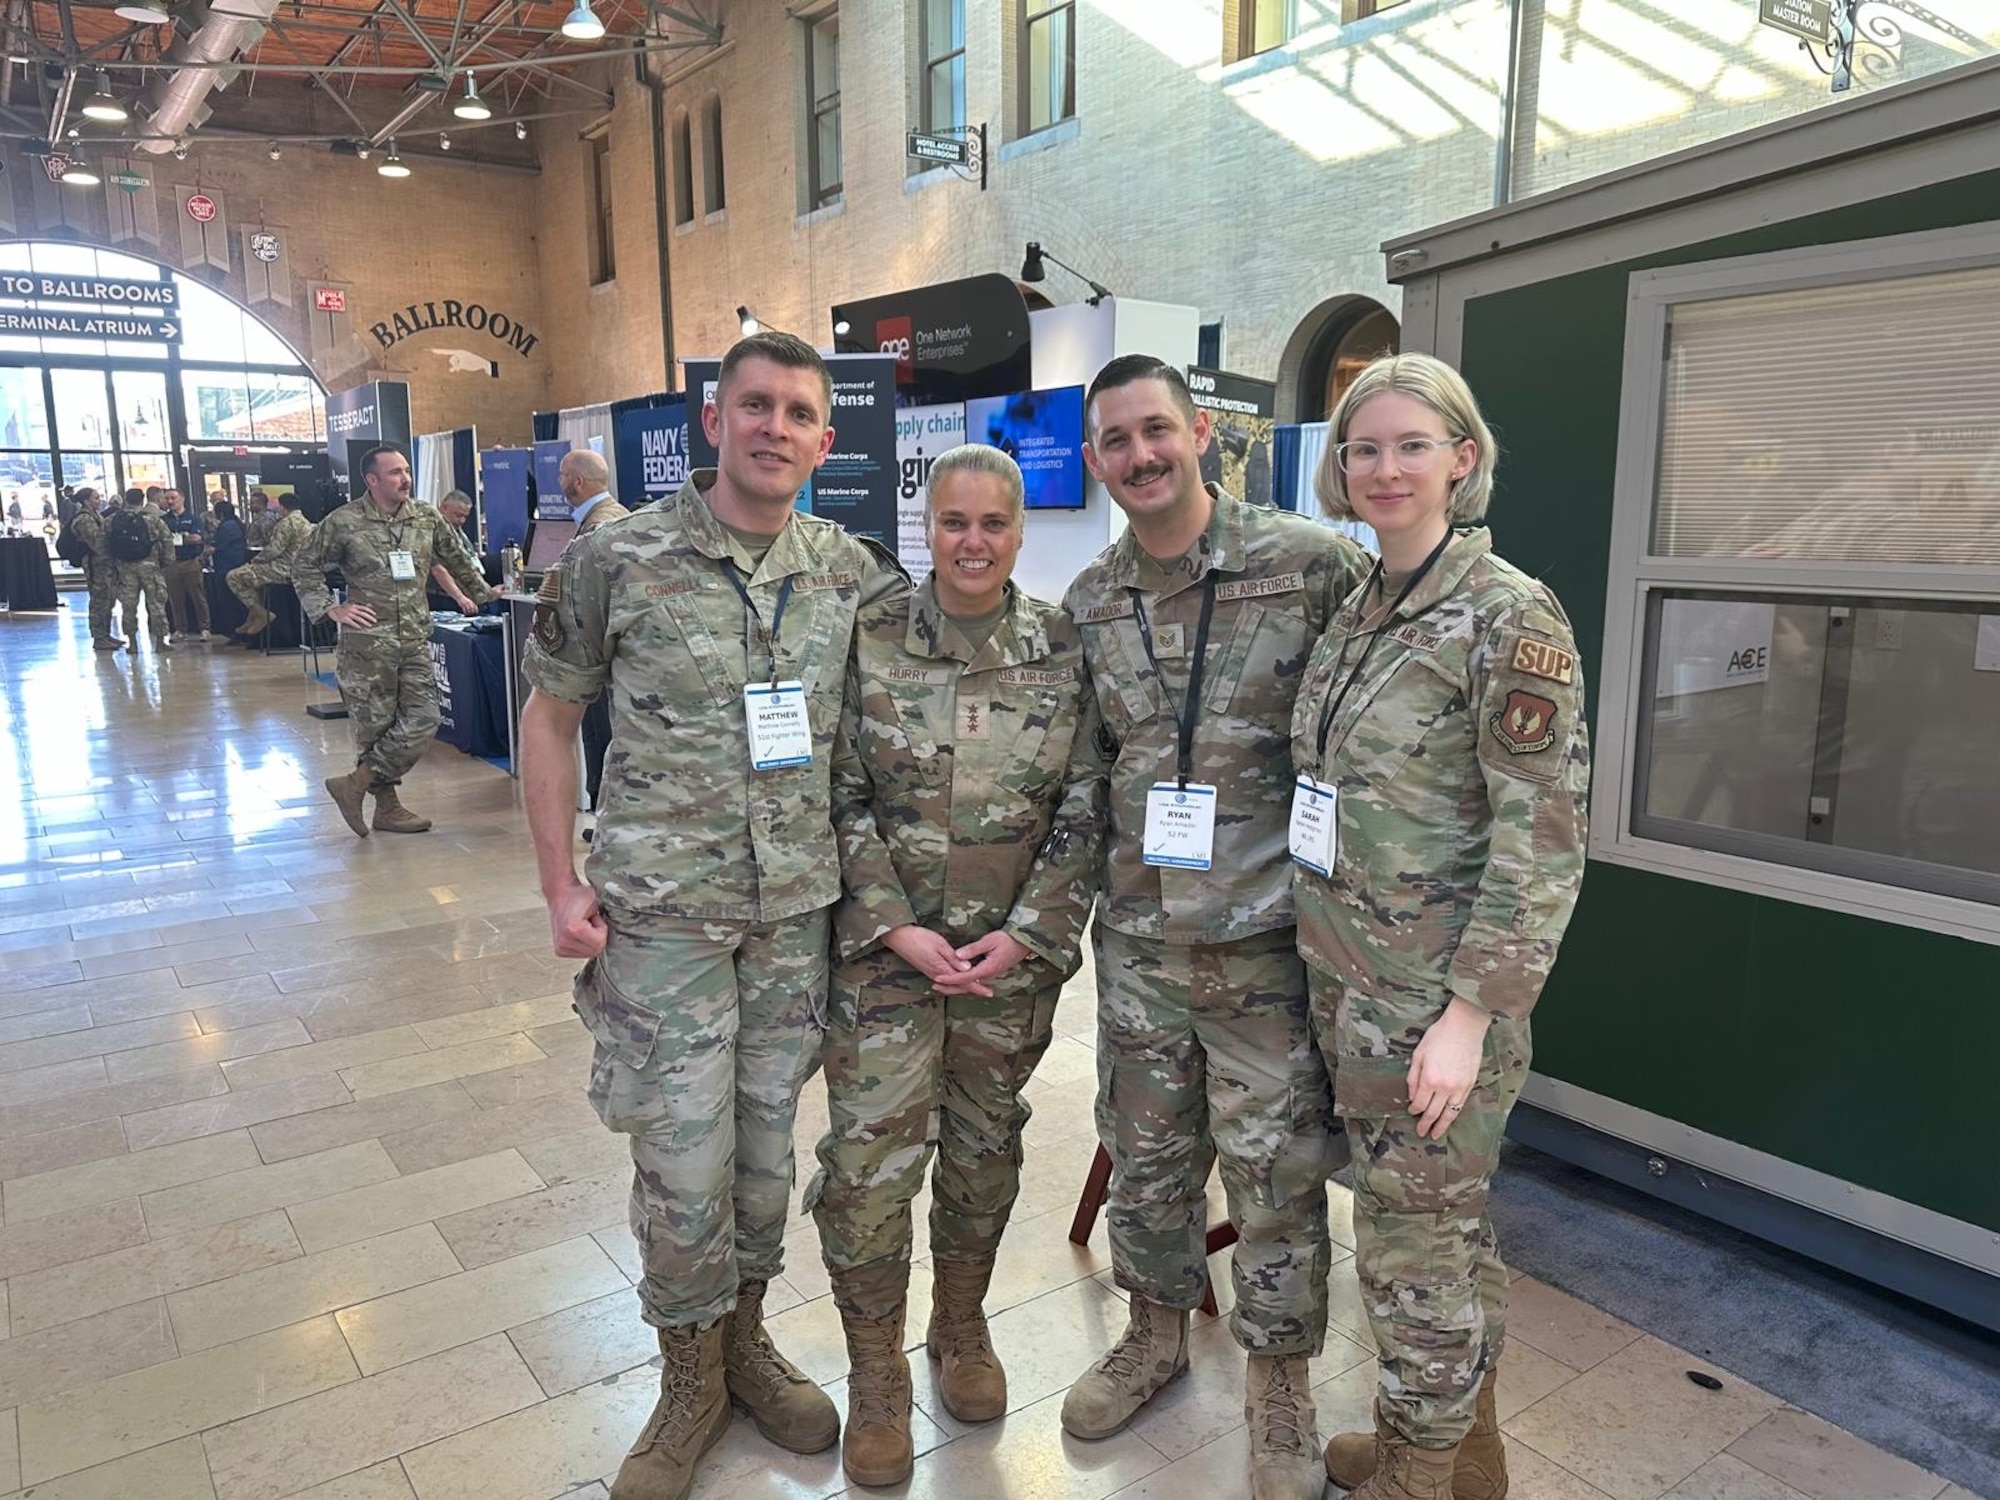 Four people in military uniforms pose for a picture